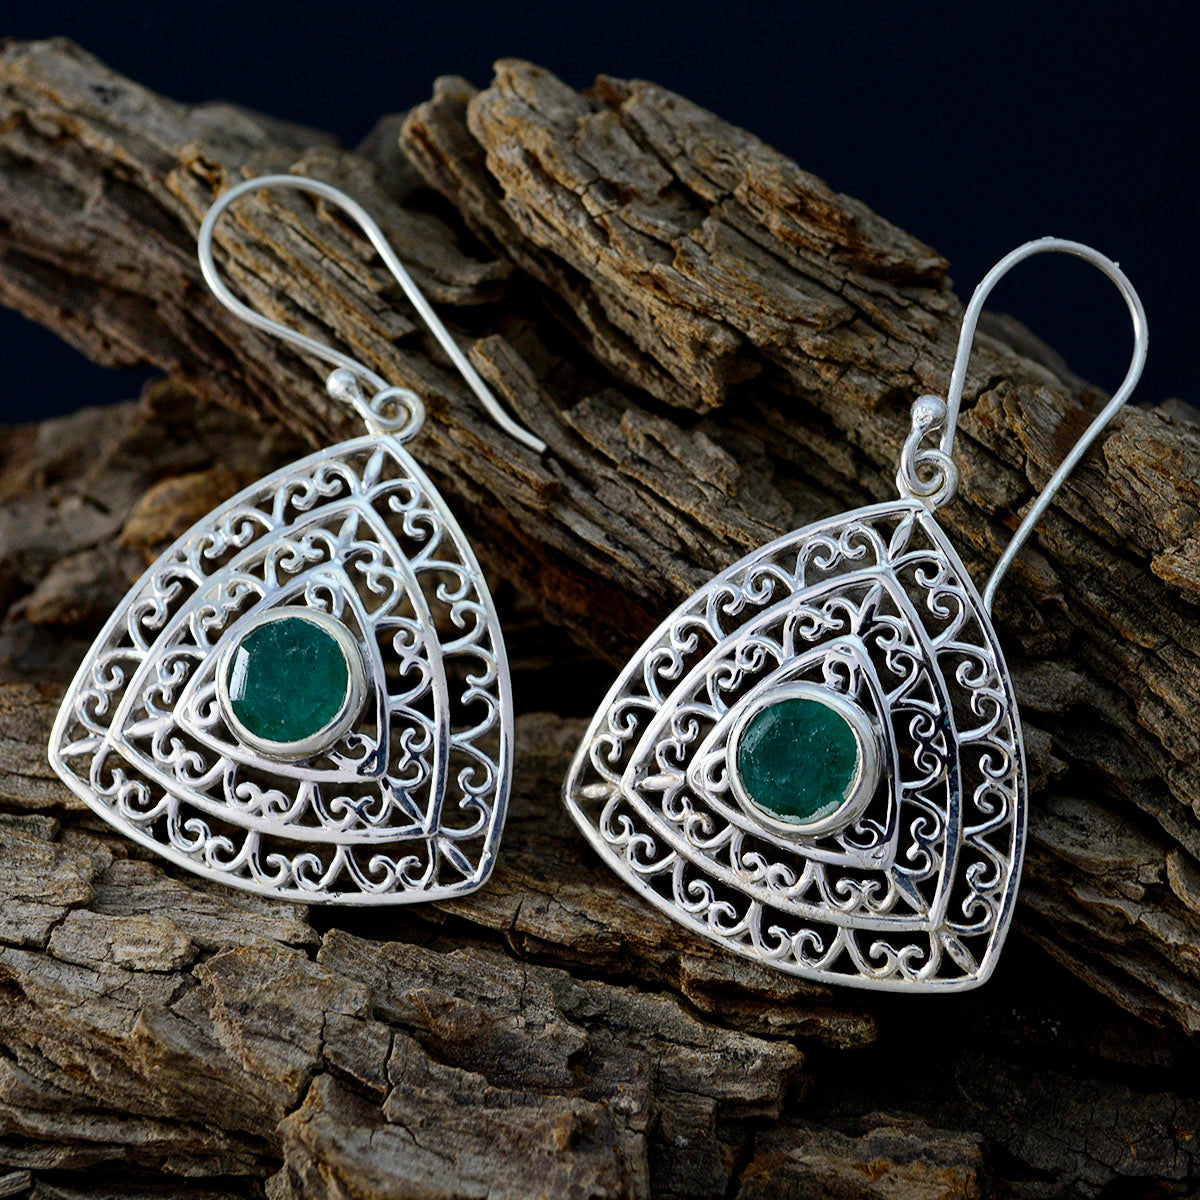 Riyo Good Gemstones round Faceted Green Indian Emerald Silver Earrings gift for sister